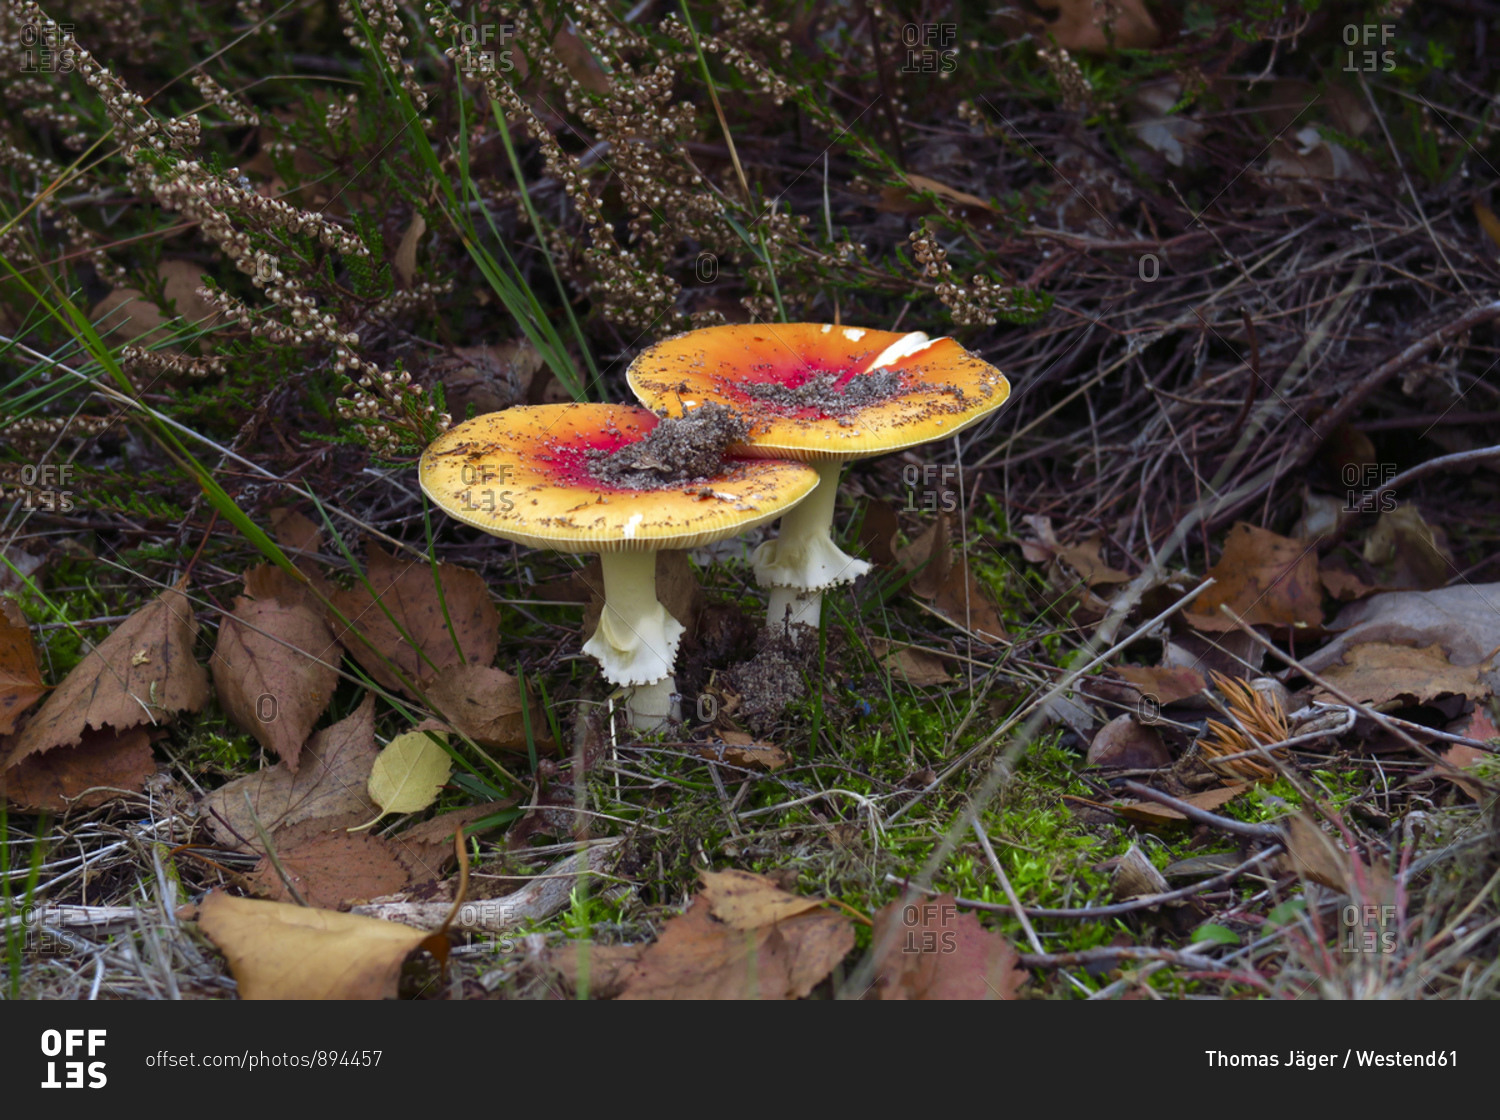 Germany- Brandenburg- Fly agaric mushrooms growing in forest